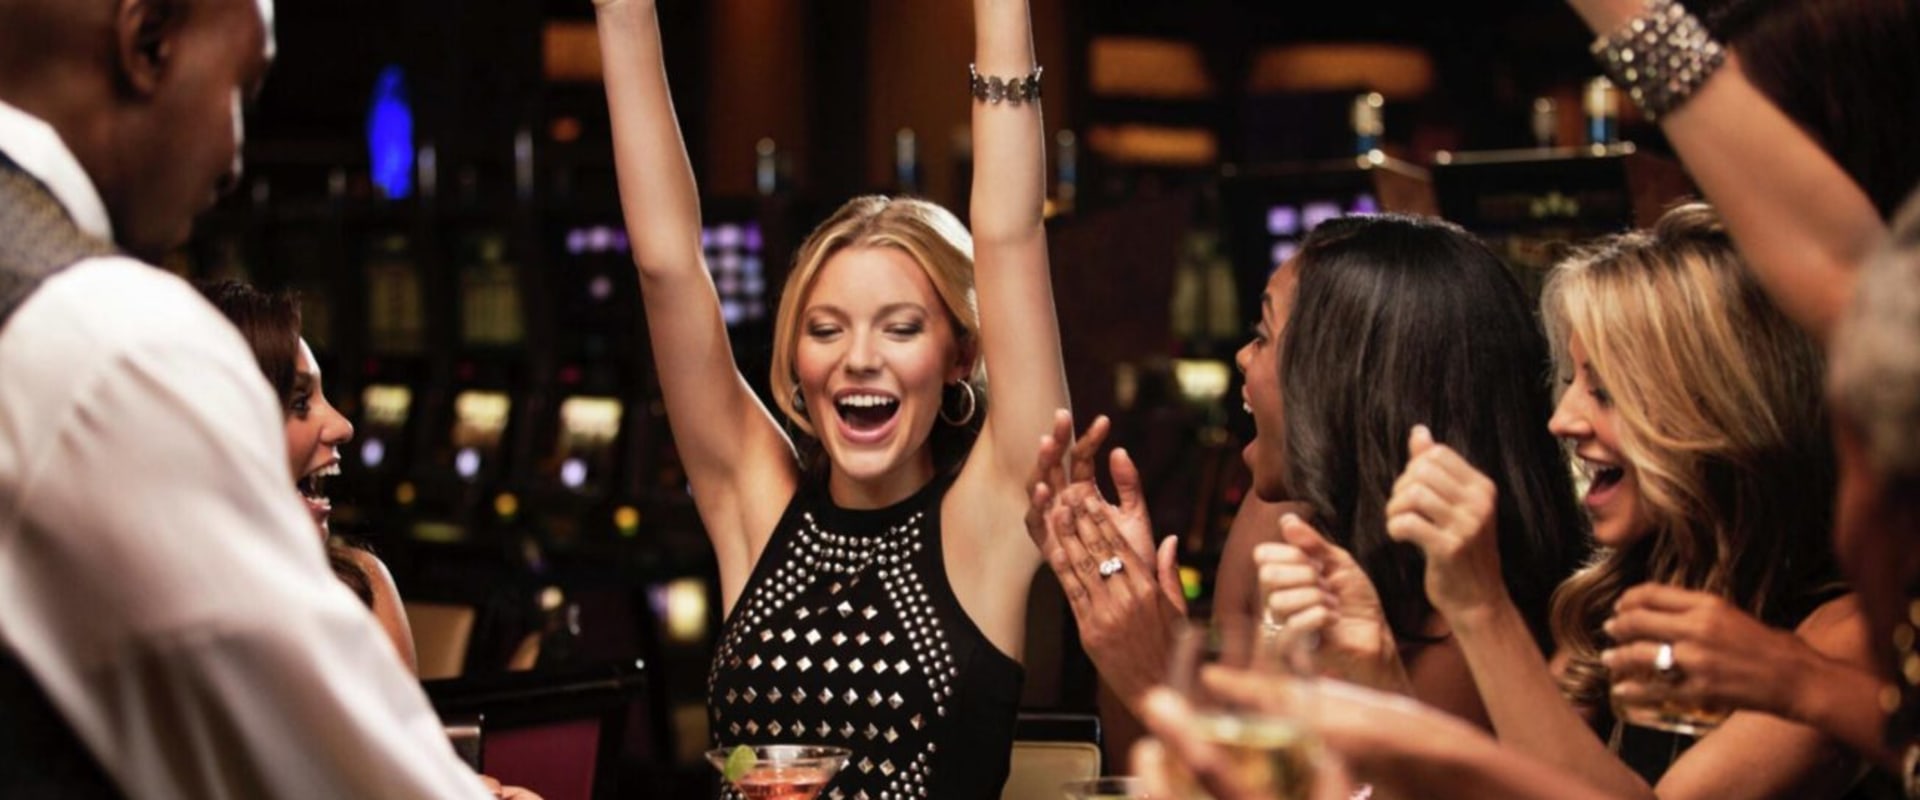 How do you win an online casino every time?